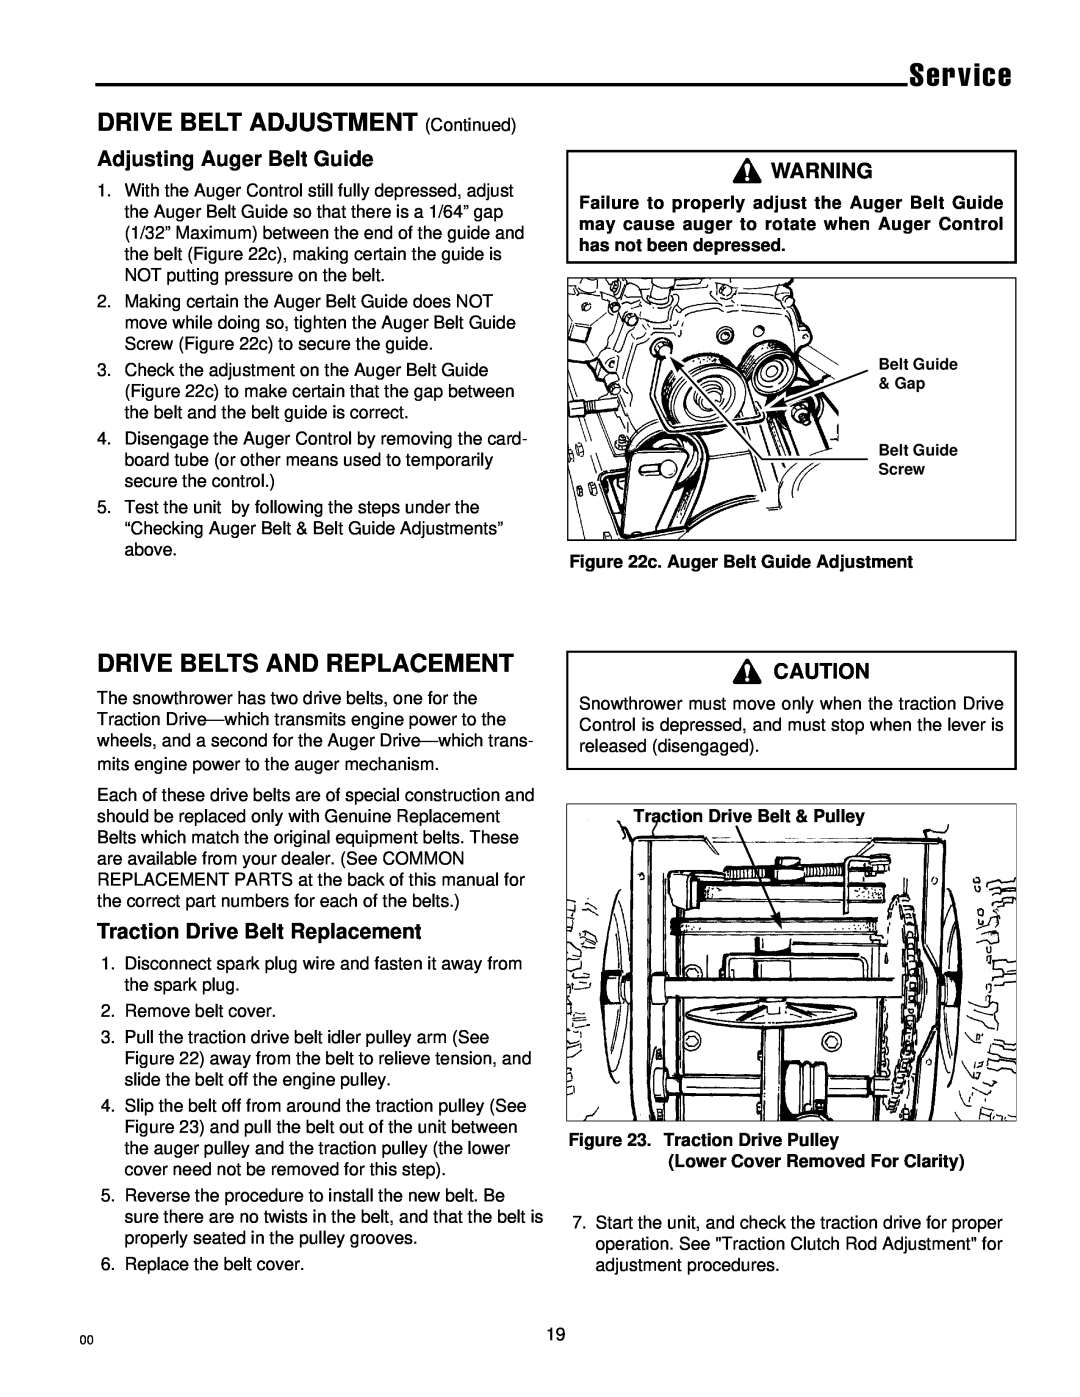 Simplicity 1693163 555M Drive Belts And Replacement, Adjusting Auger Belt Guide, Traction Drive Belt Replacement, Service 